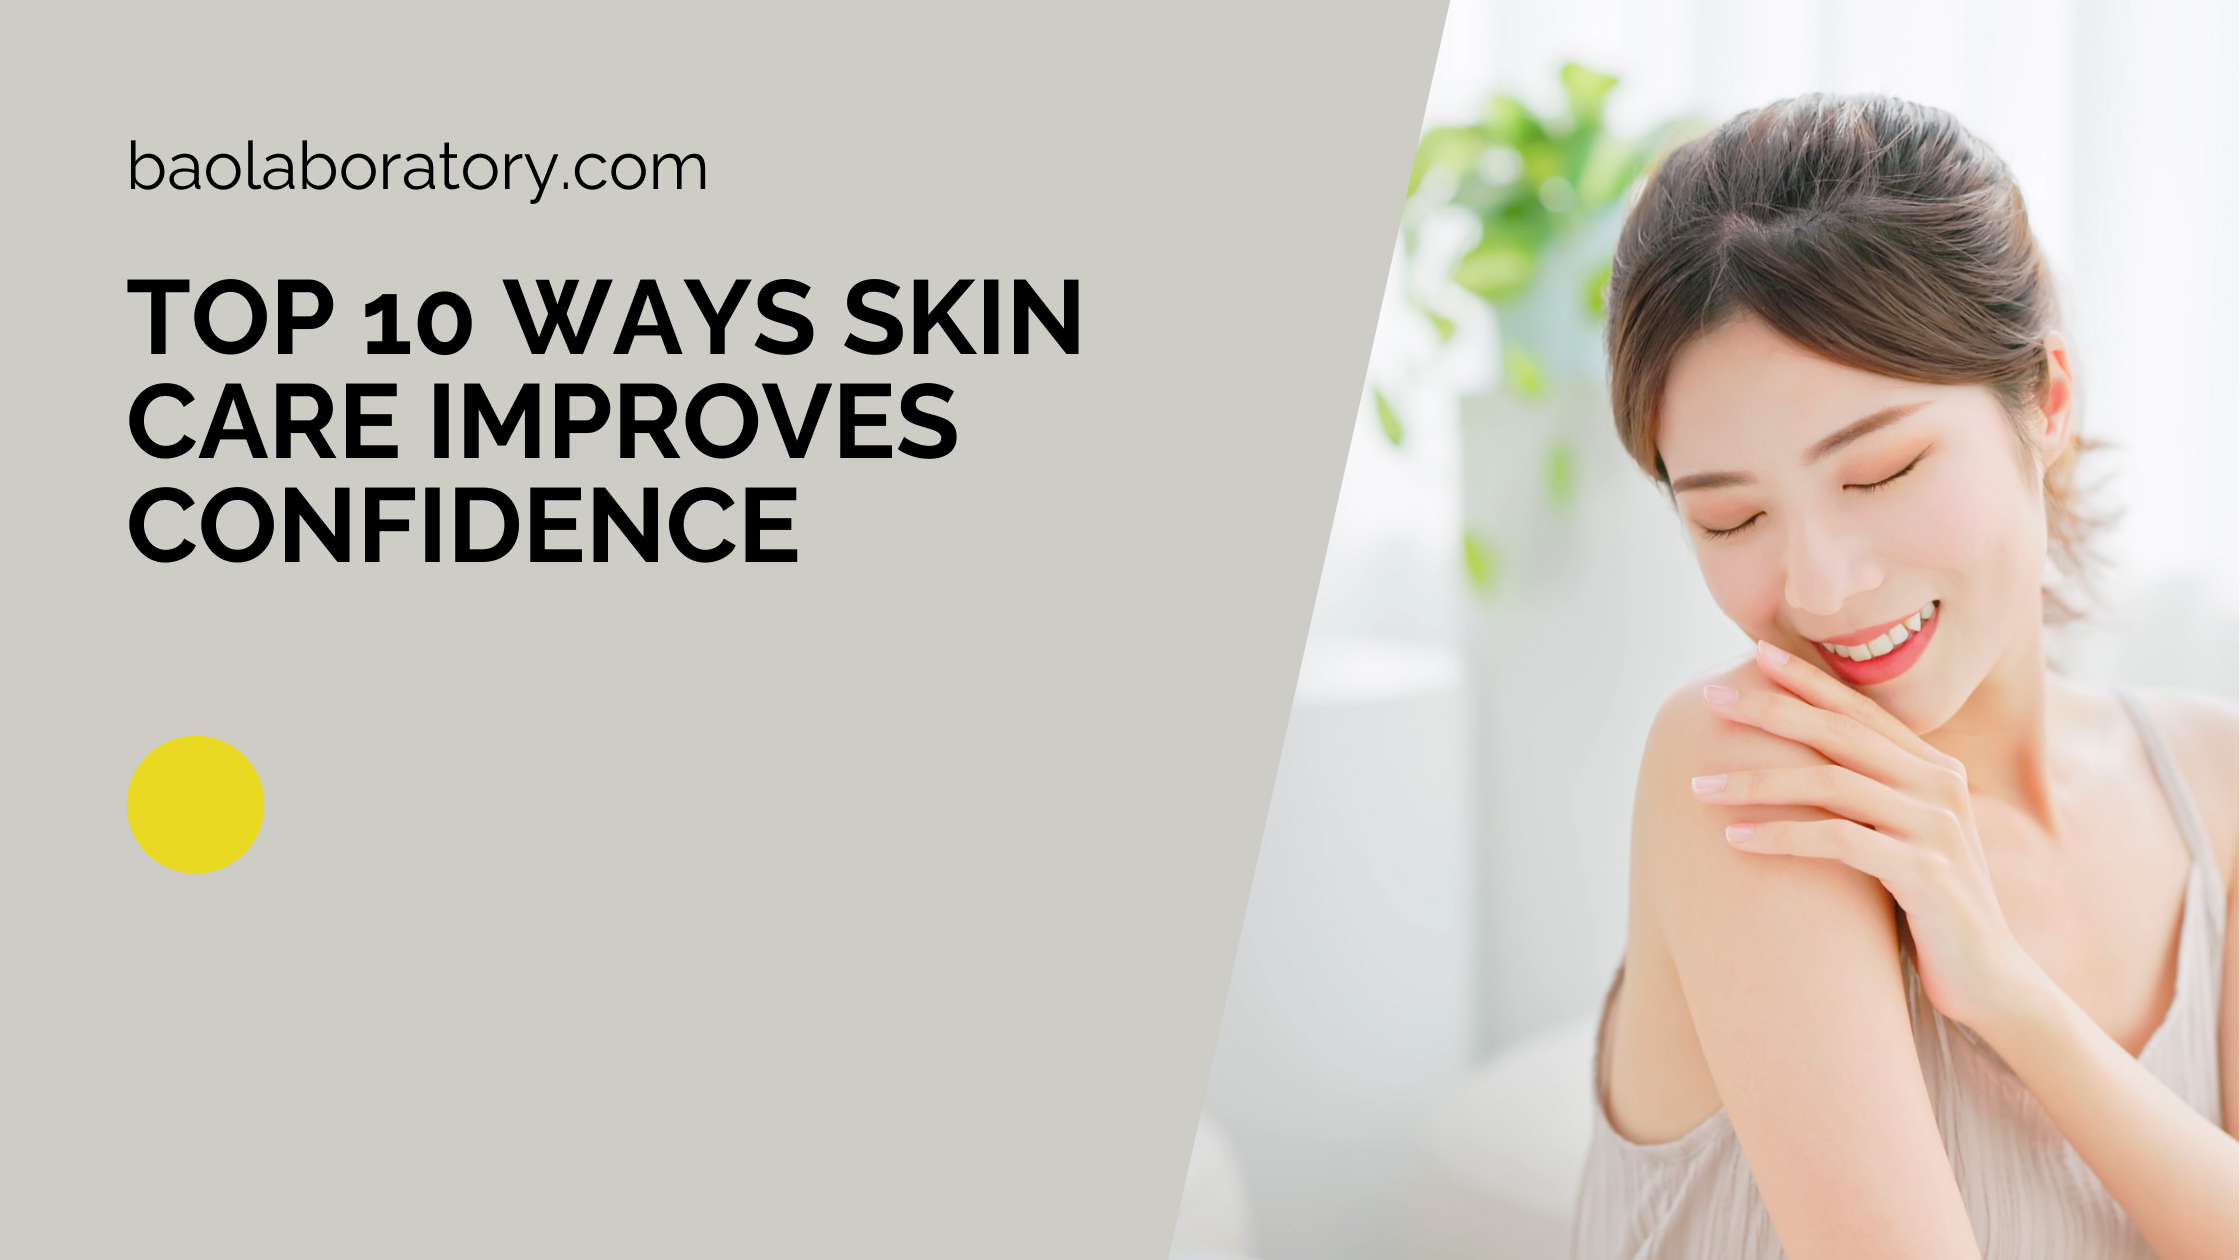 Skin Care Improves Confidence